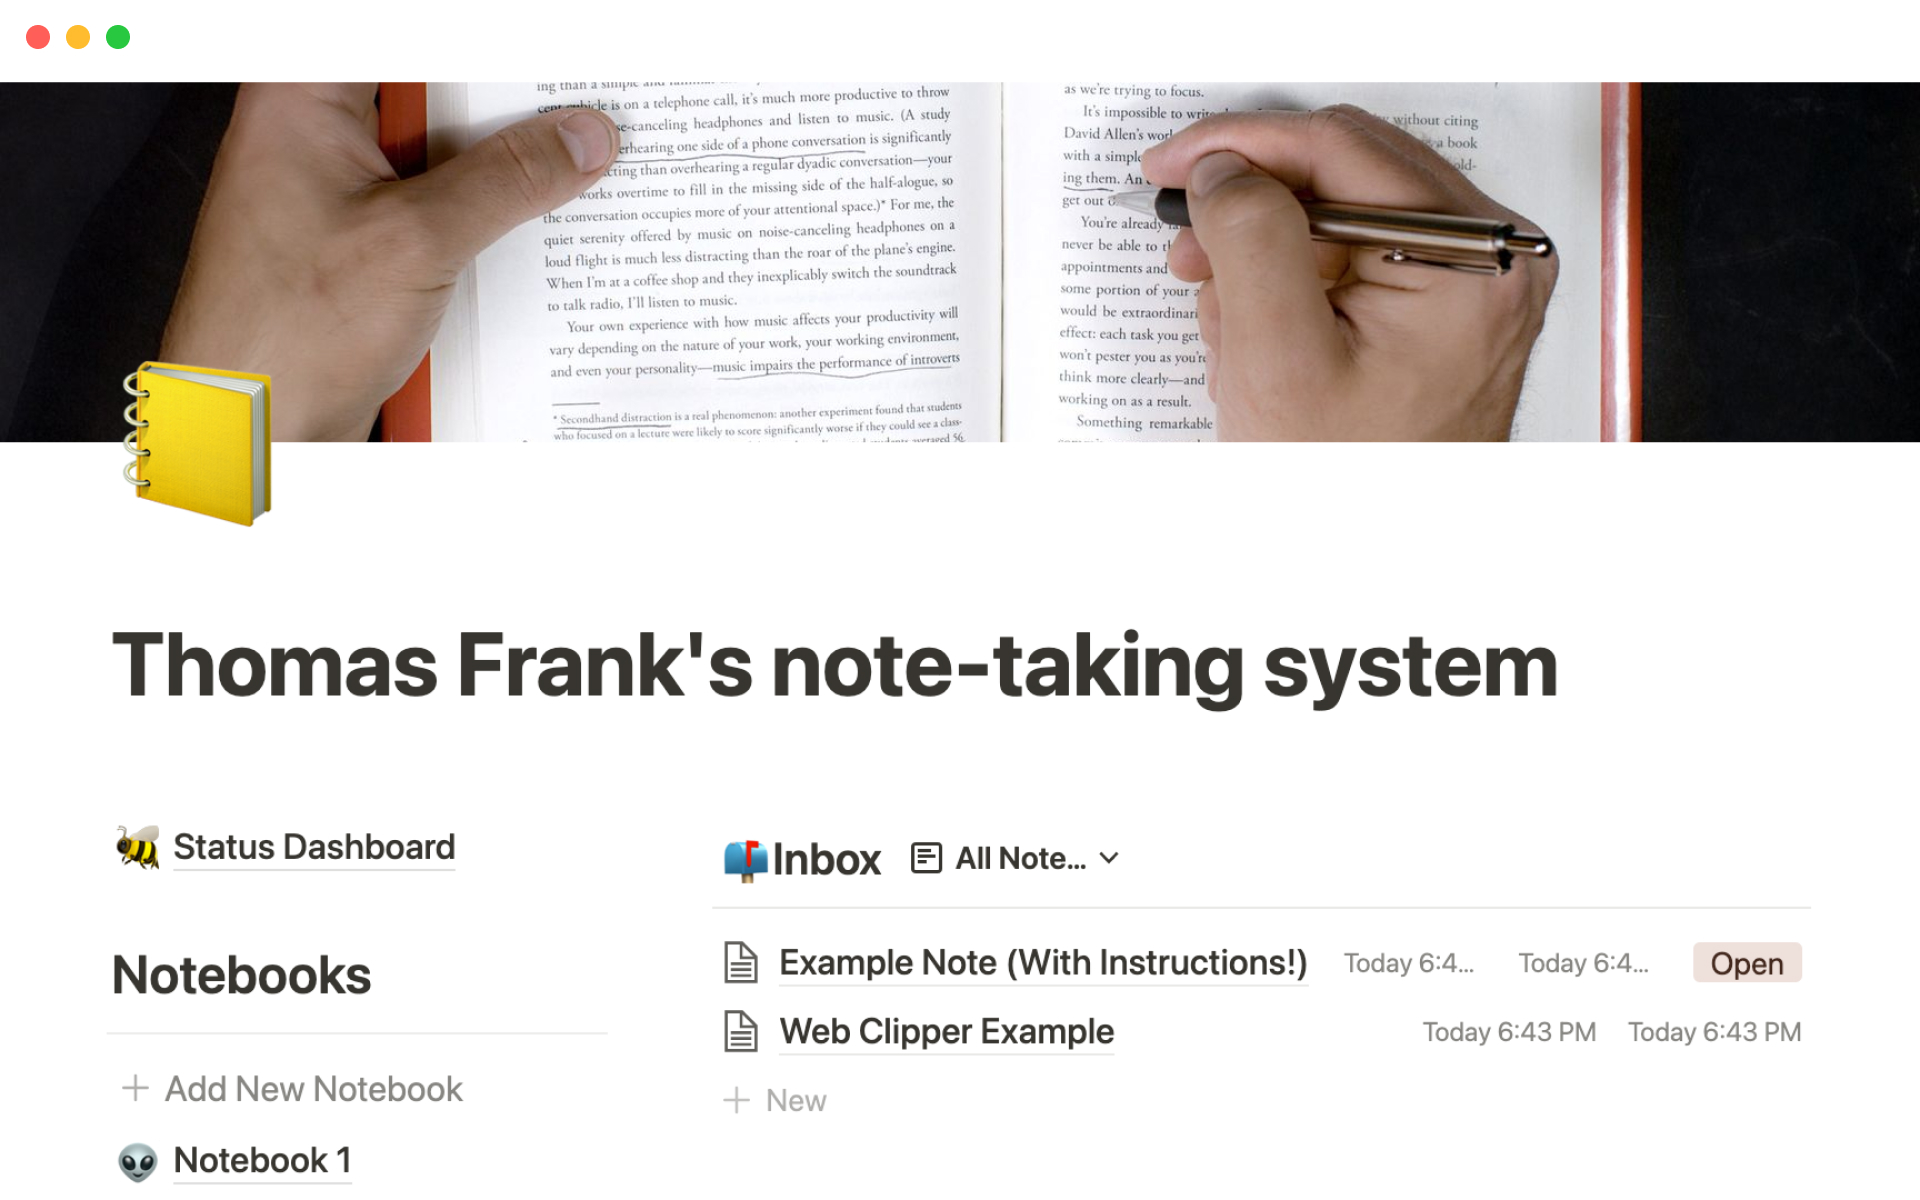 The desktop image for the Thomas Frank's note-taking system template